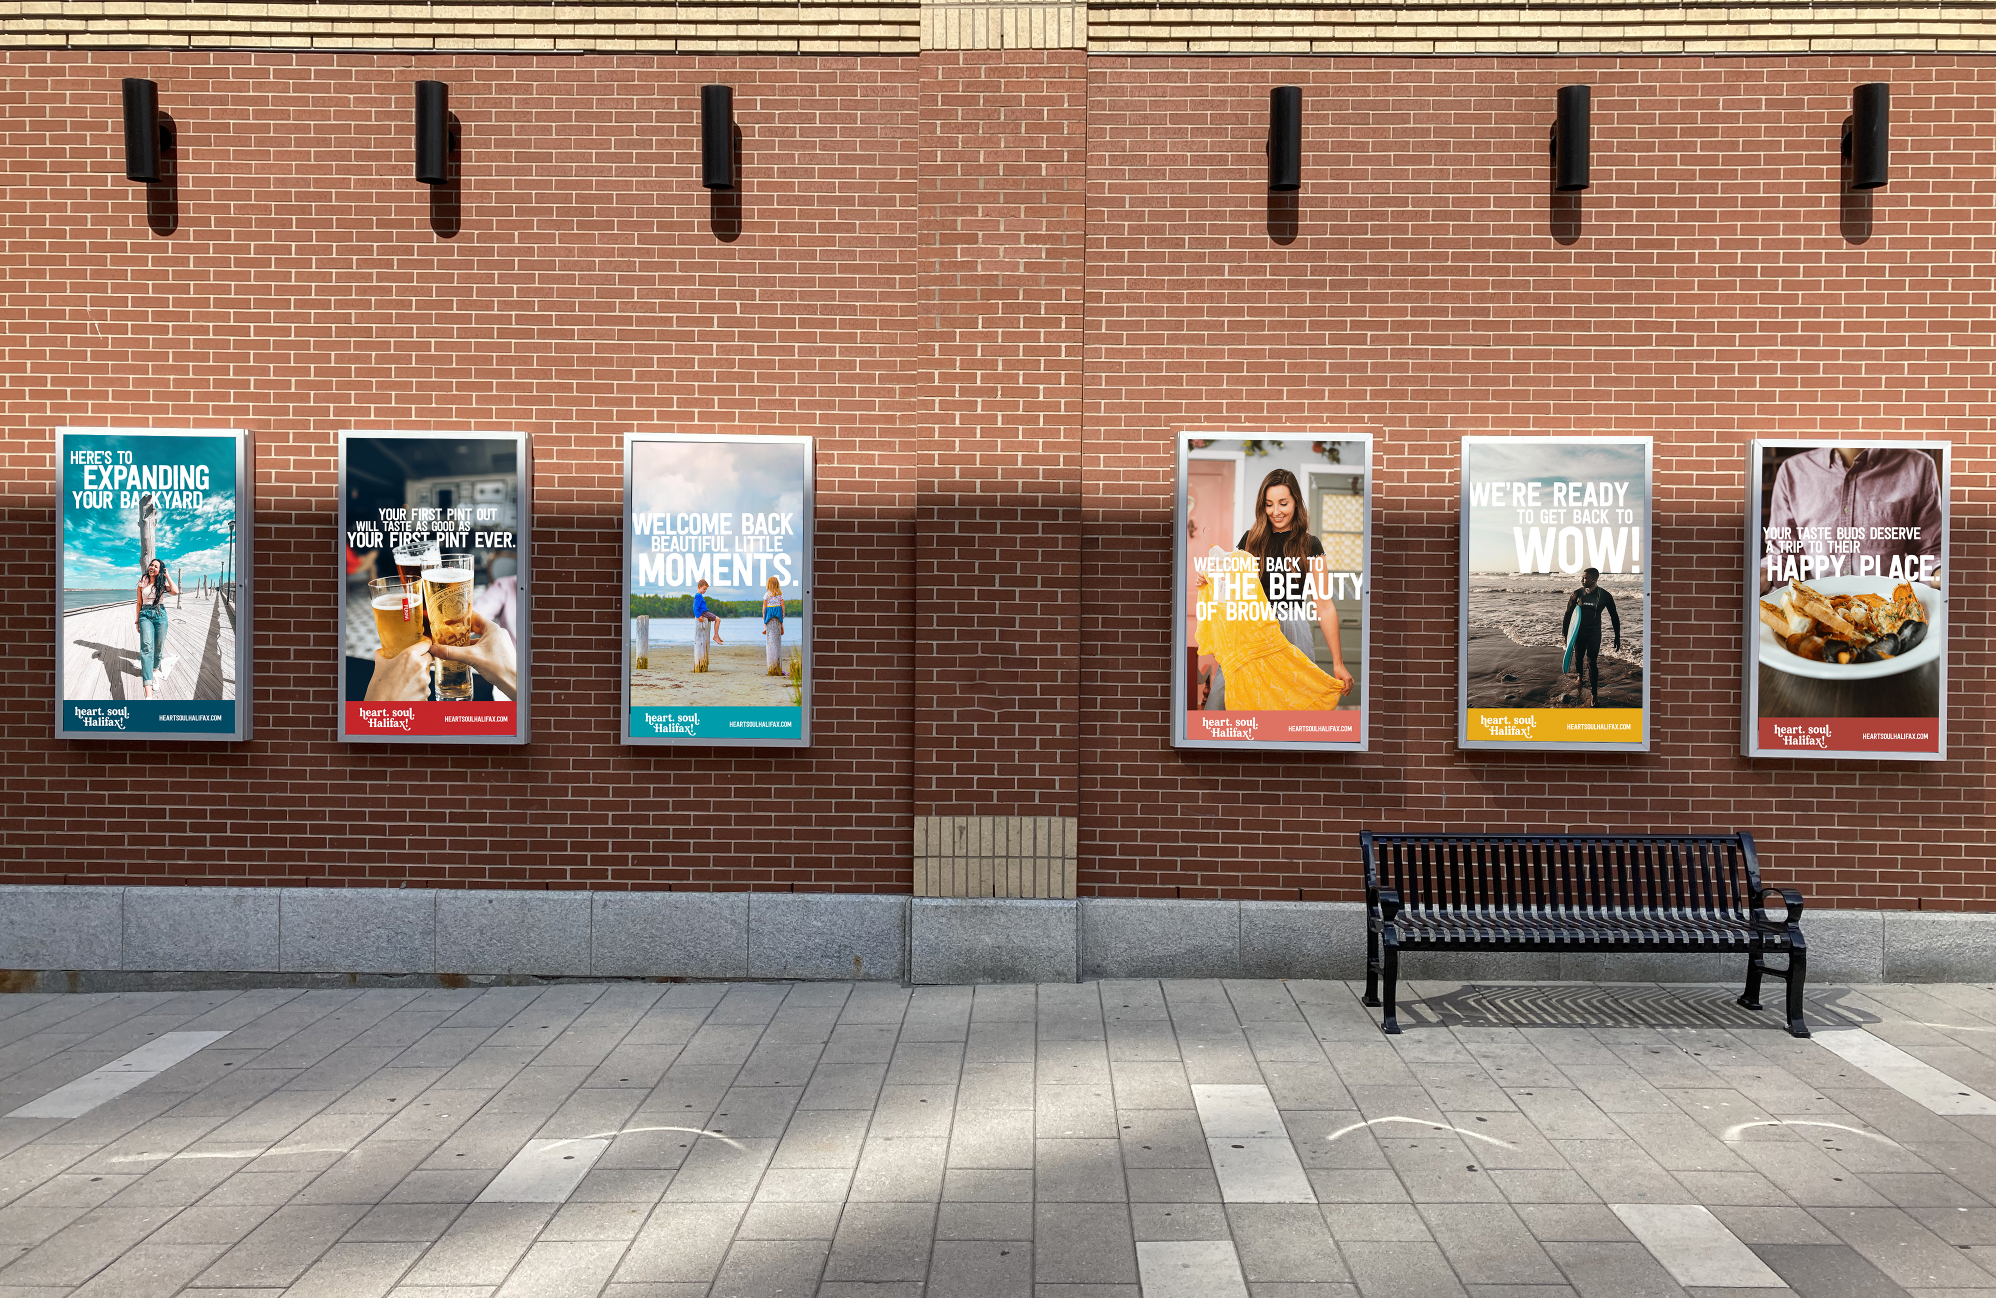 6 of Discover Halifax's 'heart. soul. Halifax!' colourful campaign posters on display on Argyle Street brick wall